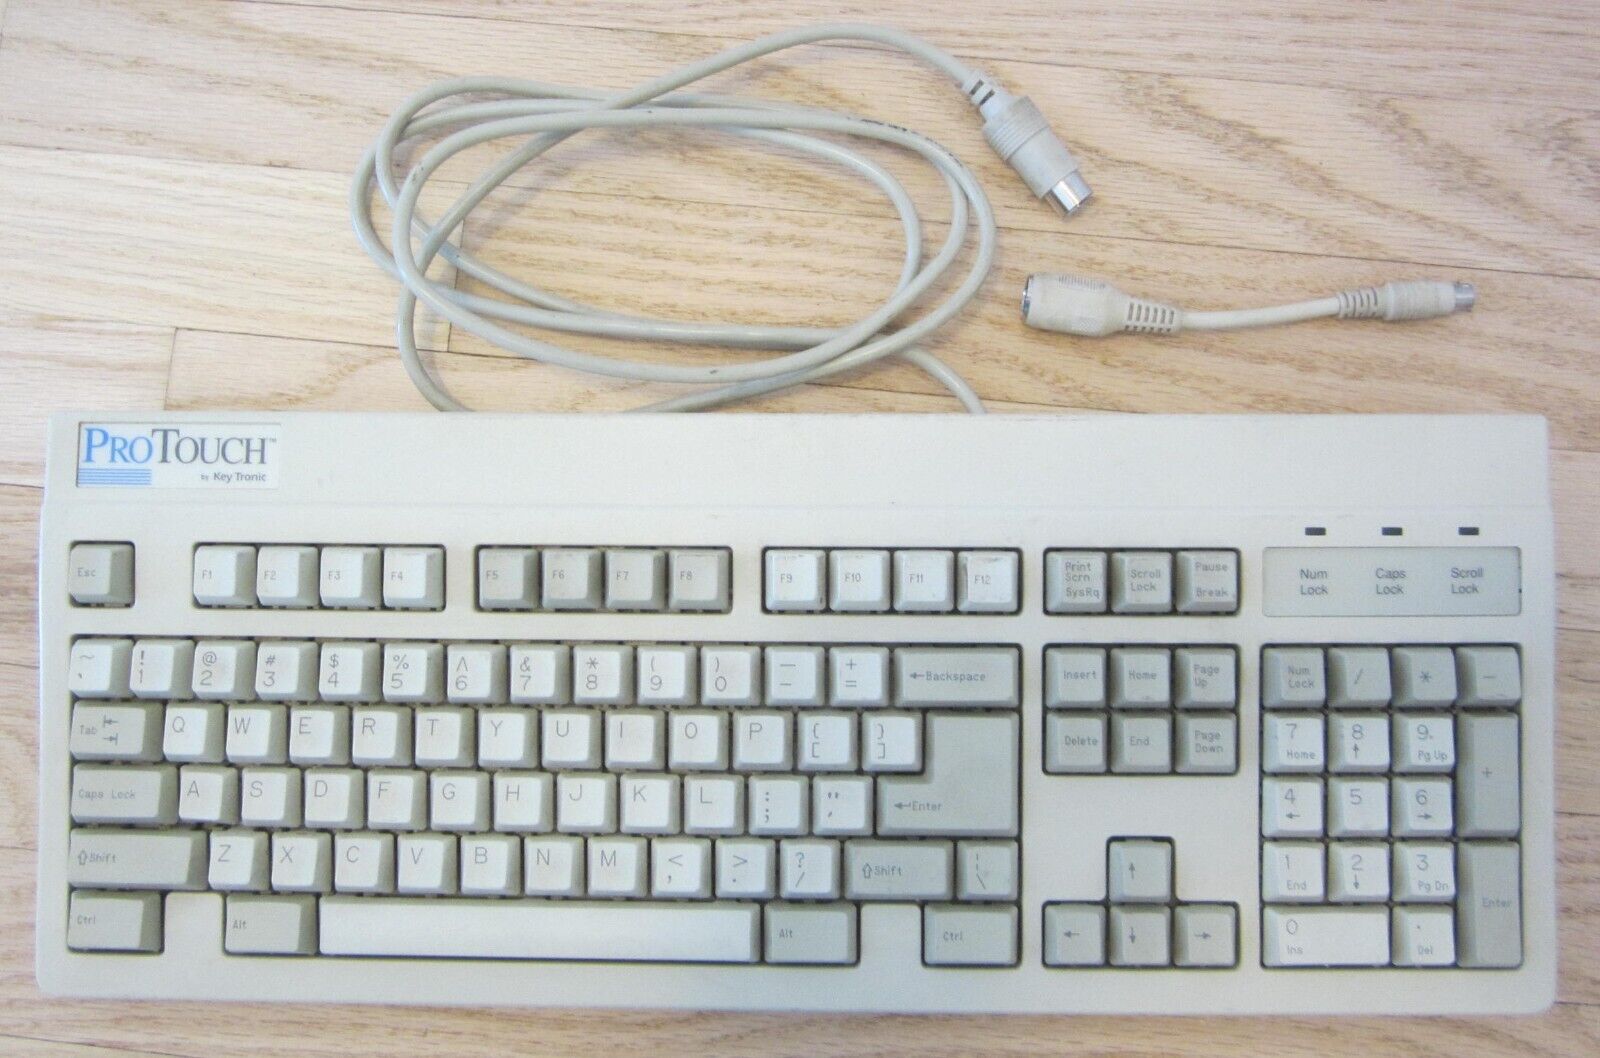 Vintage Keytronic PROTOUCH AT/XT 5 Pin DIN Wired Computer Keyboard - Beige